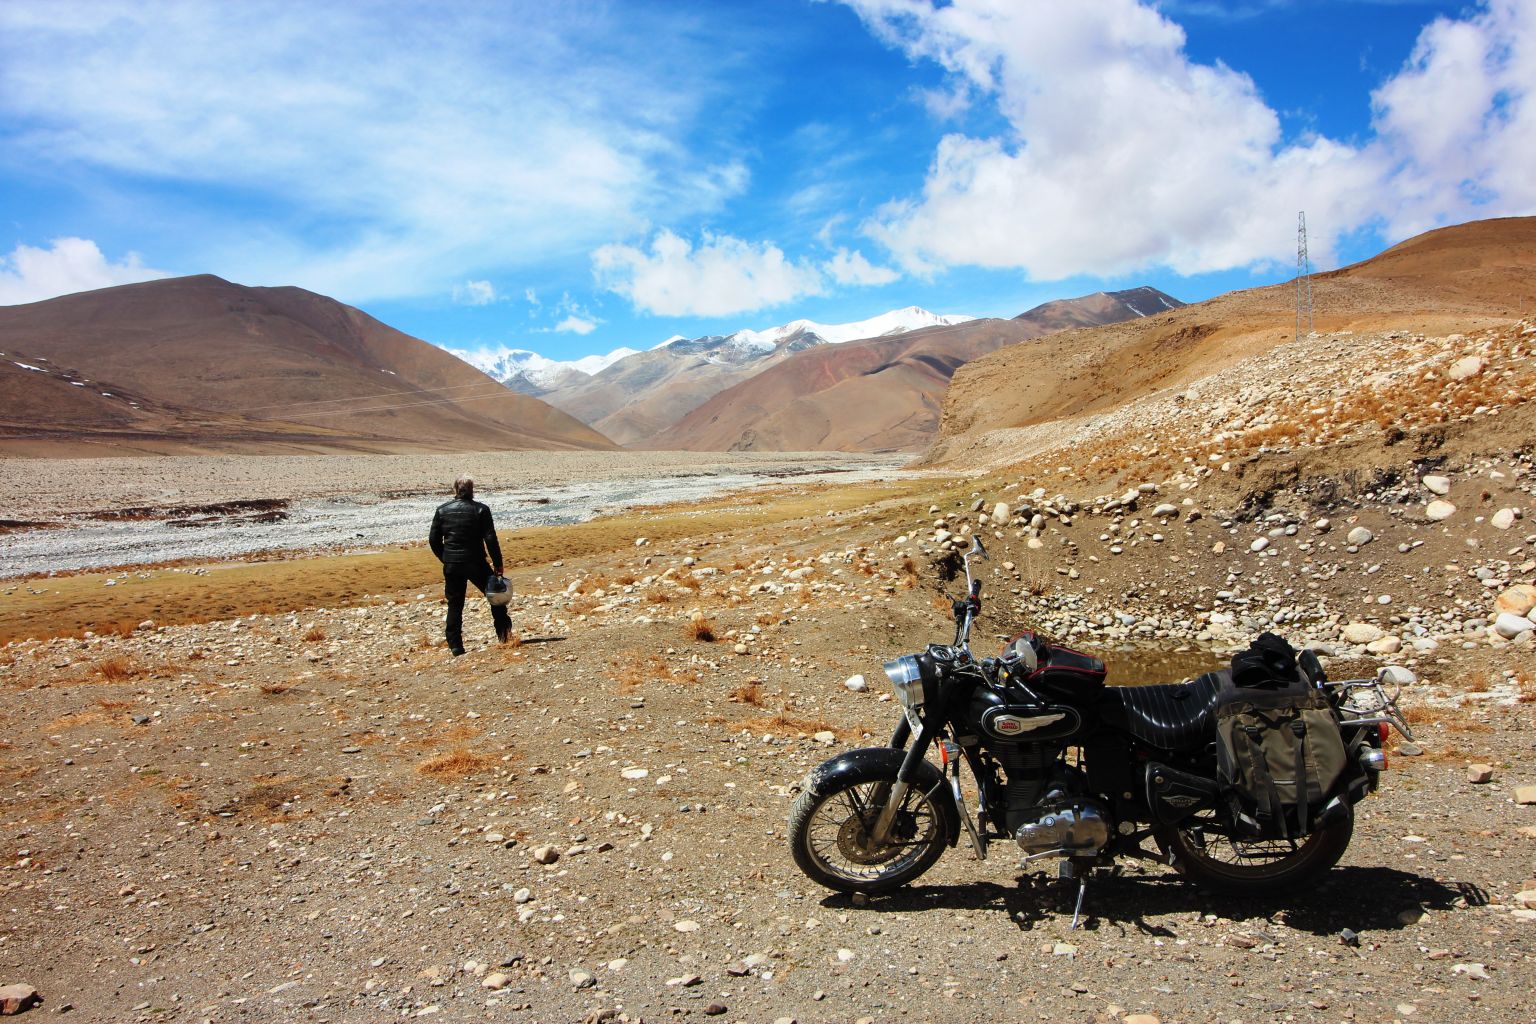 Motorcycling to My. Everest